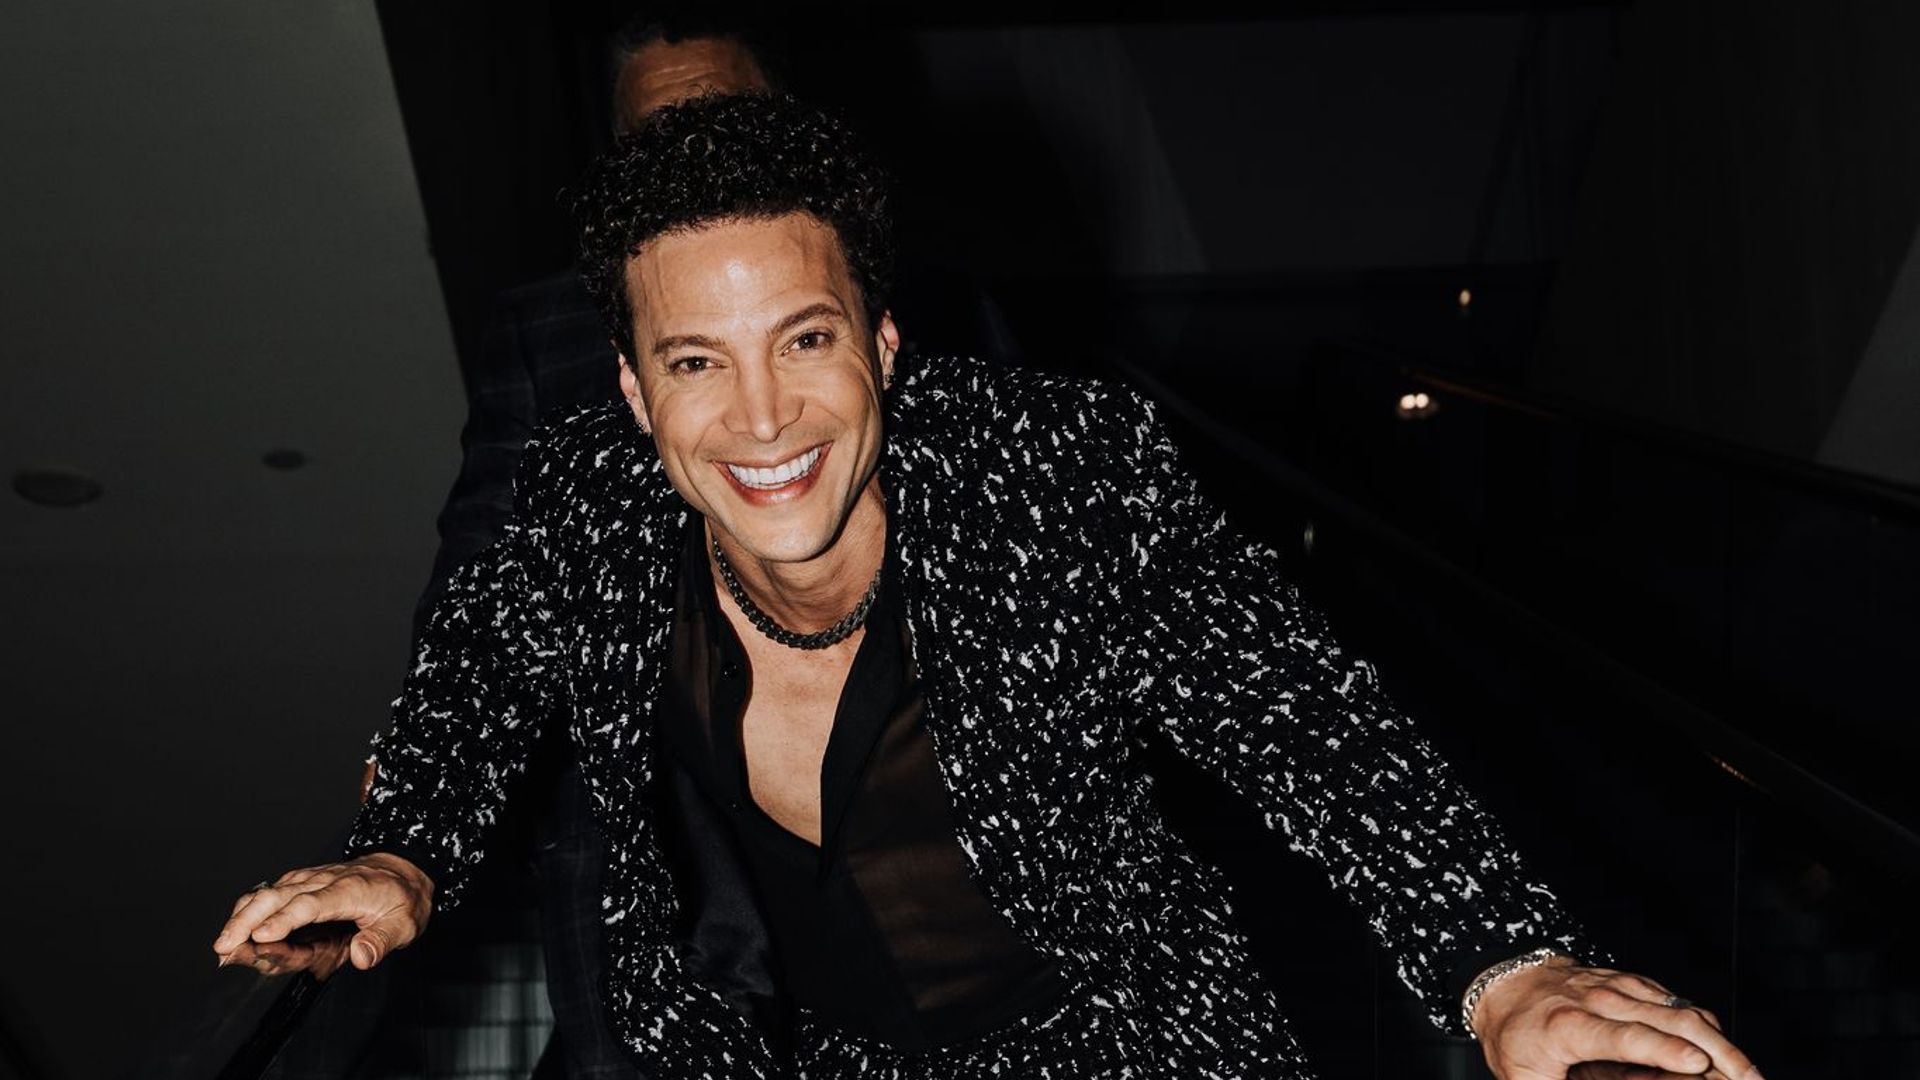 For opening night of 'Once Upon a More Time' at the Maquis  Justin Guarini wore a suit by Atelier Cillian and jewels by Versani NY. Styled by Greg Dassonville for DassonVogue